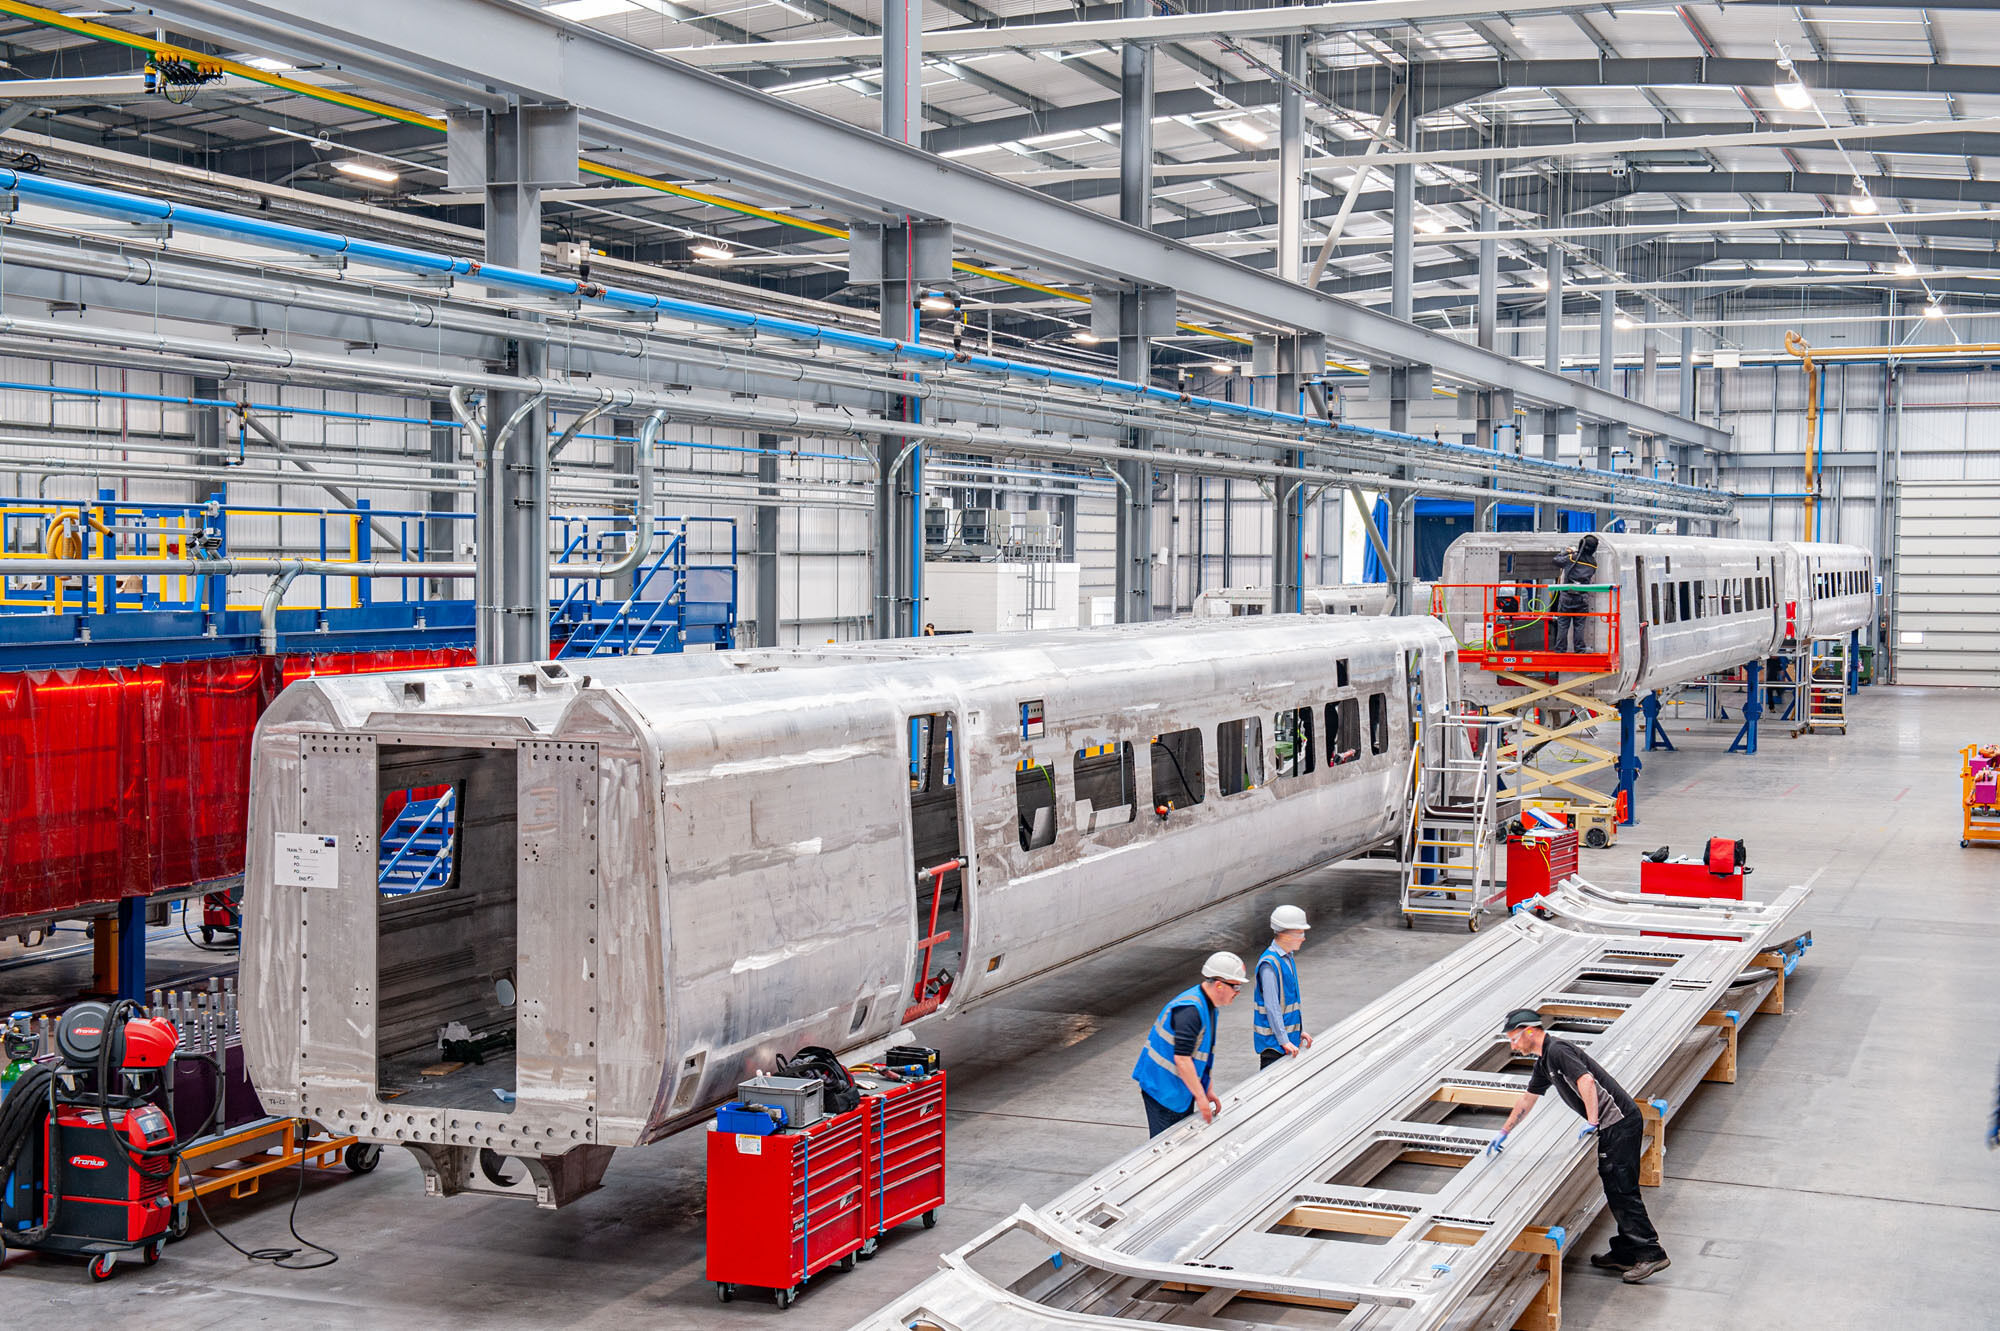 The production of rolling stock at the Hitachi Rail plant in Newton Aycliffe, UK